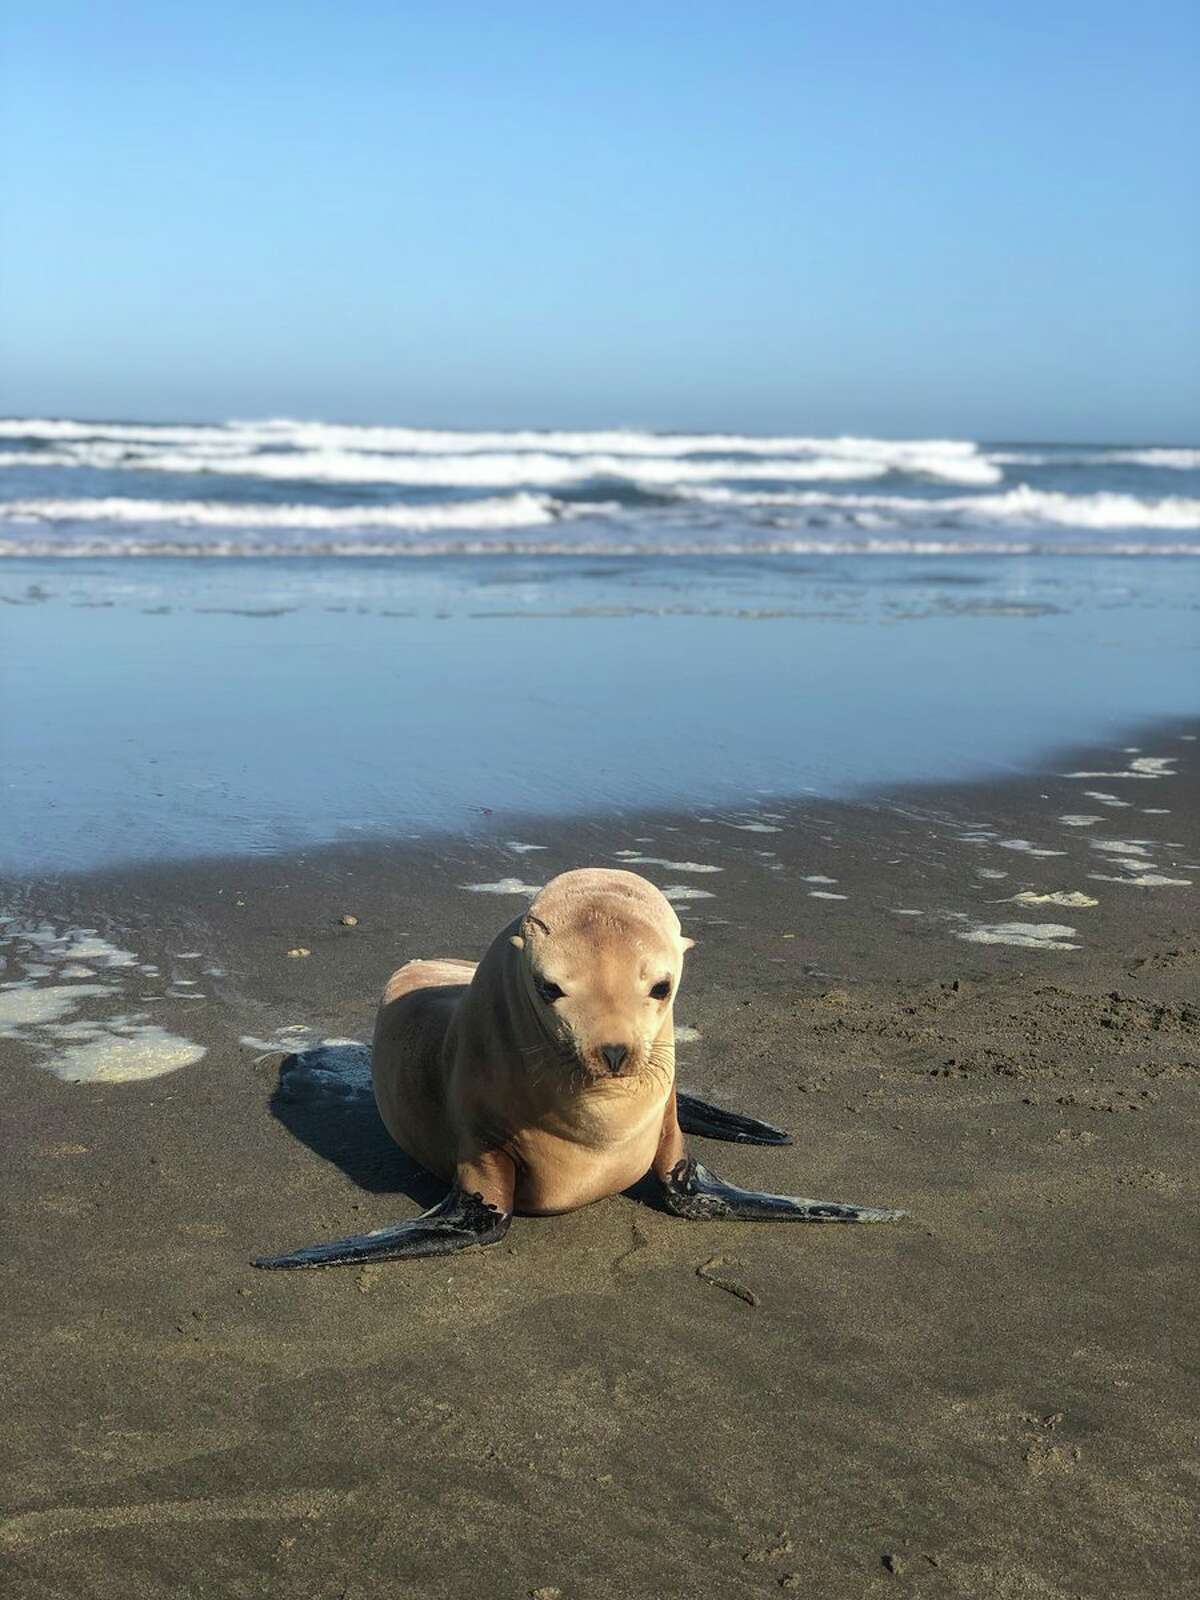 A sickly-looking sea lion was found alone at Ocean Beach on Wednesday, July 3, 2019.